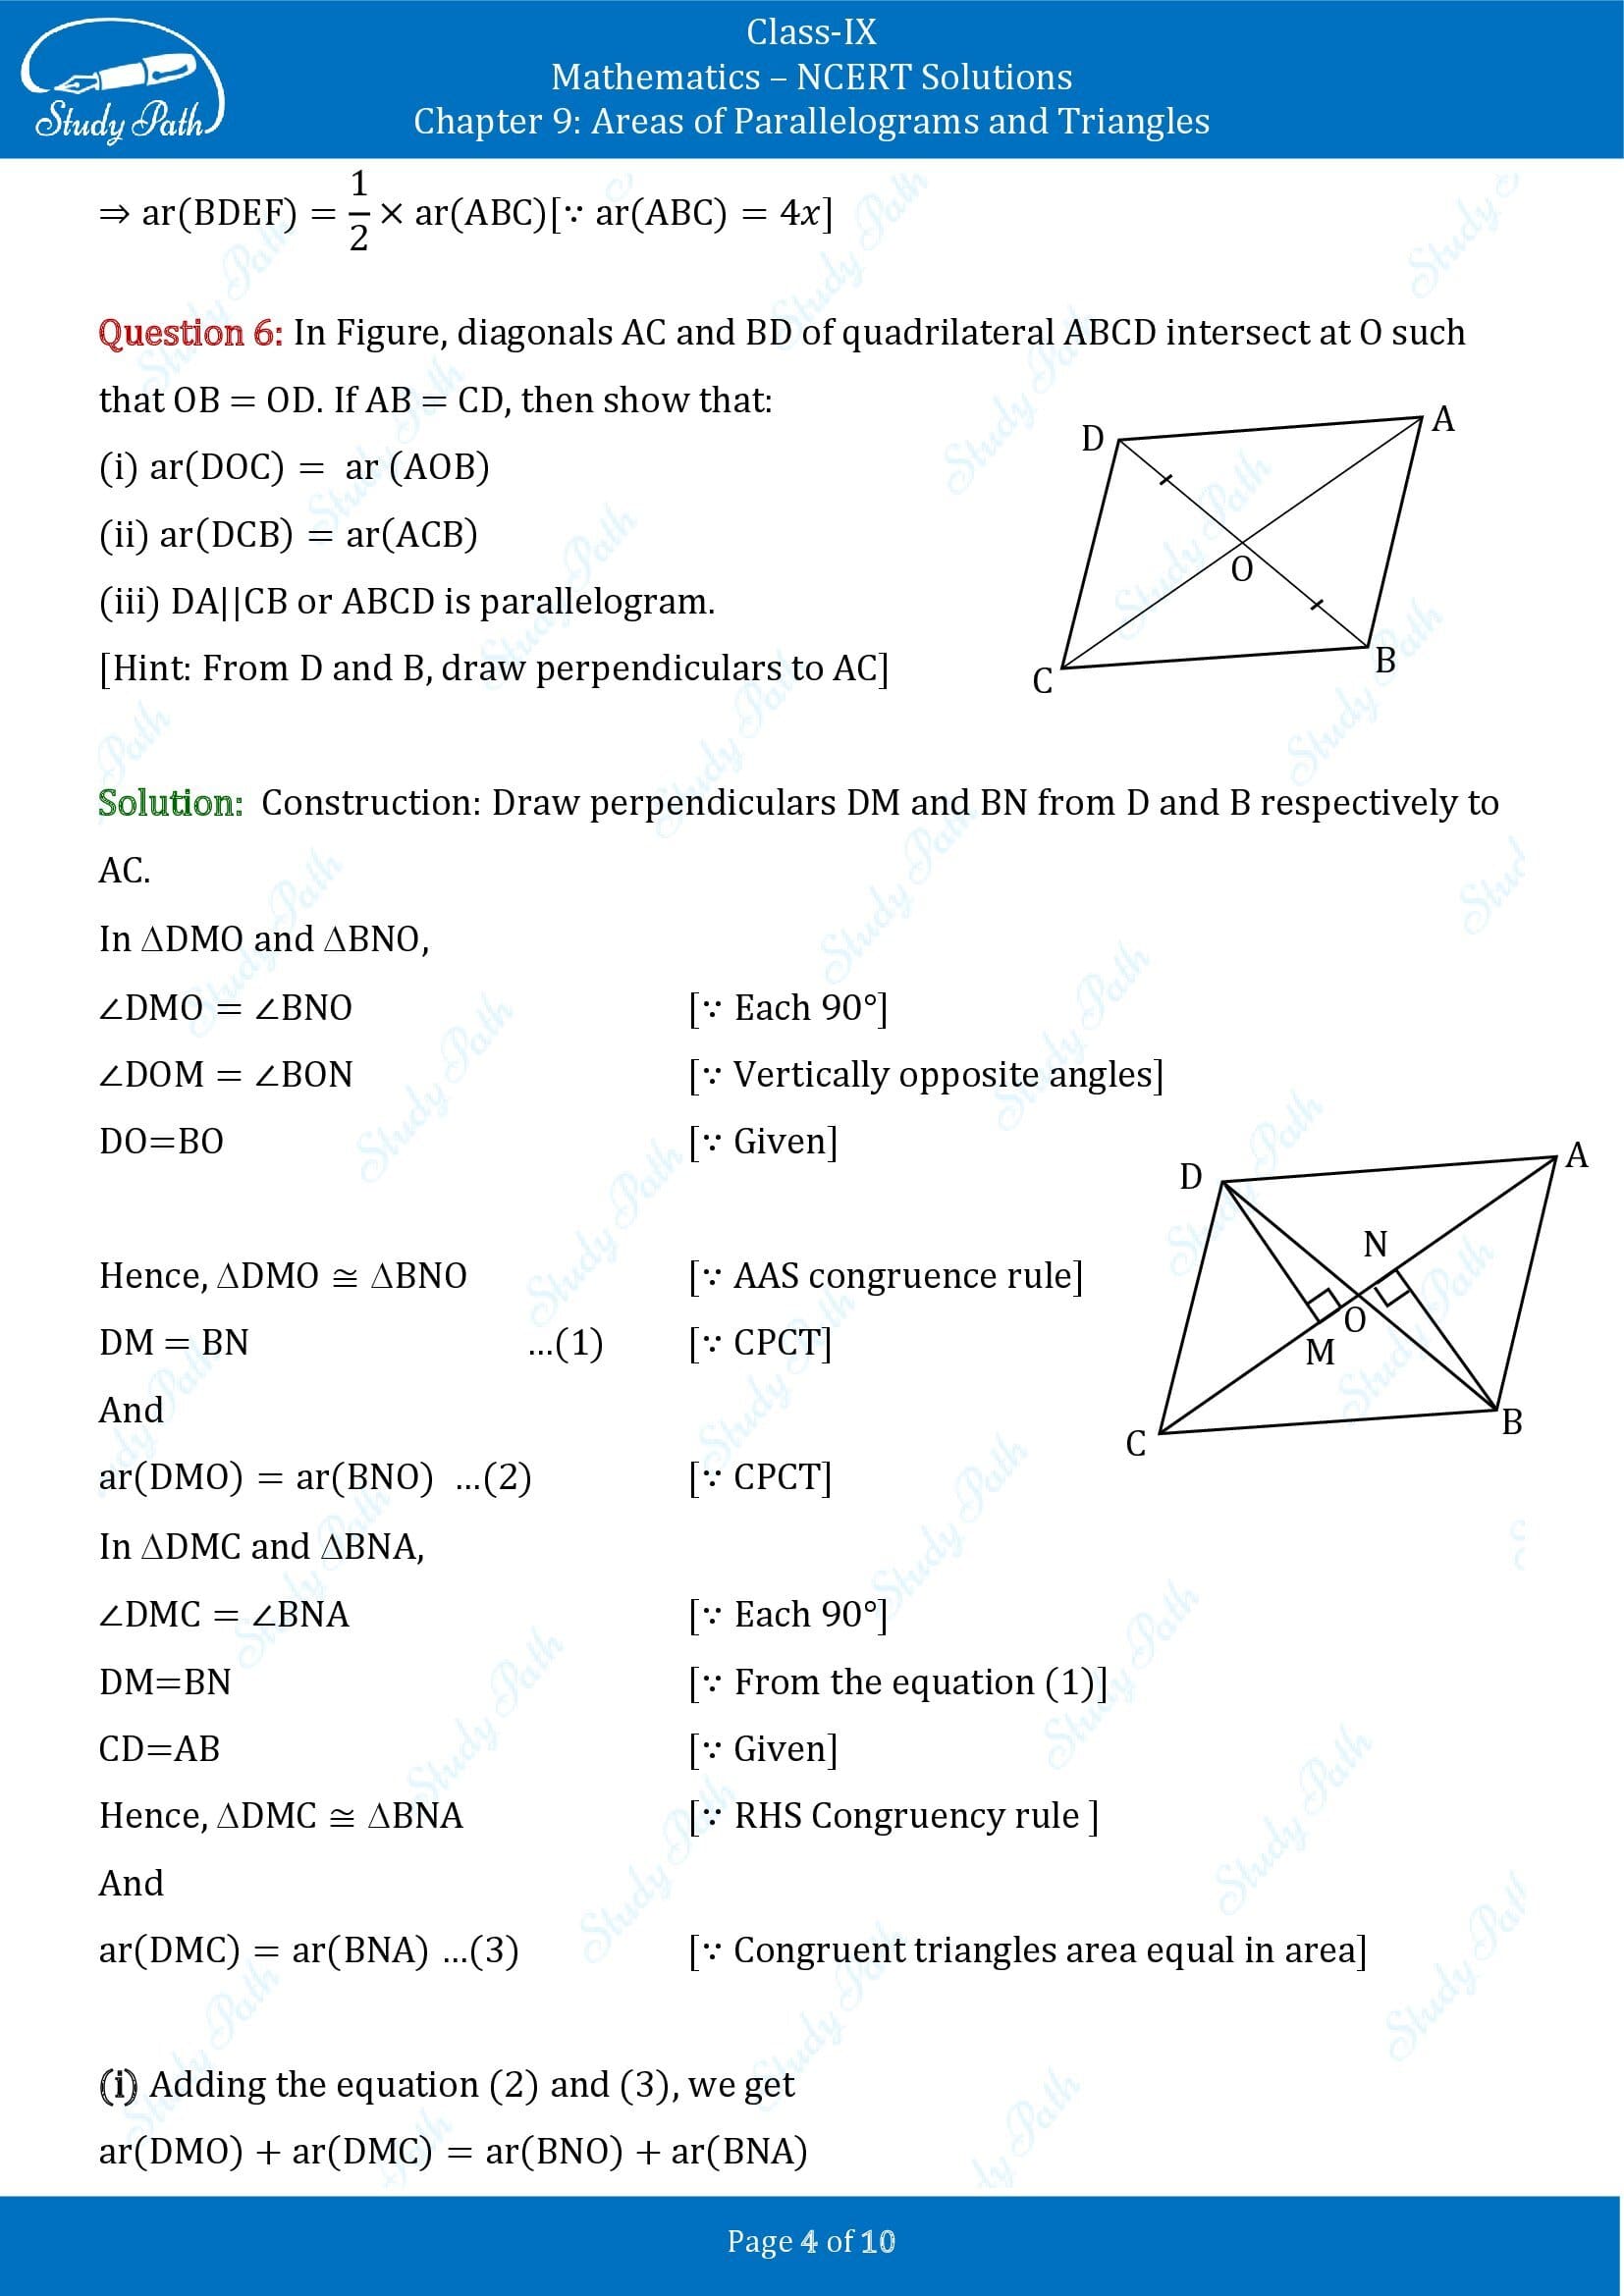 NCERT Solutions for Class 9 Maths Chapter 9 Areas of Parallelograms and Triangles Exercise 9.3 00004